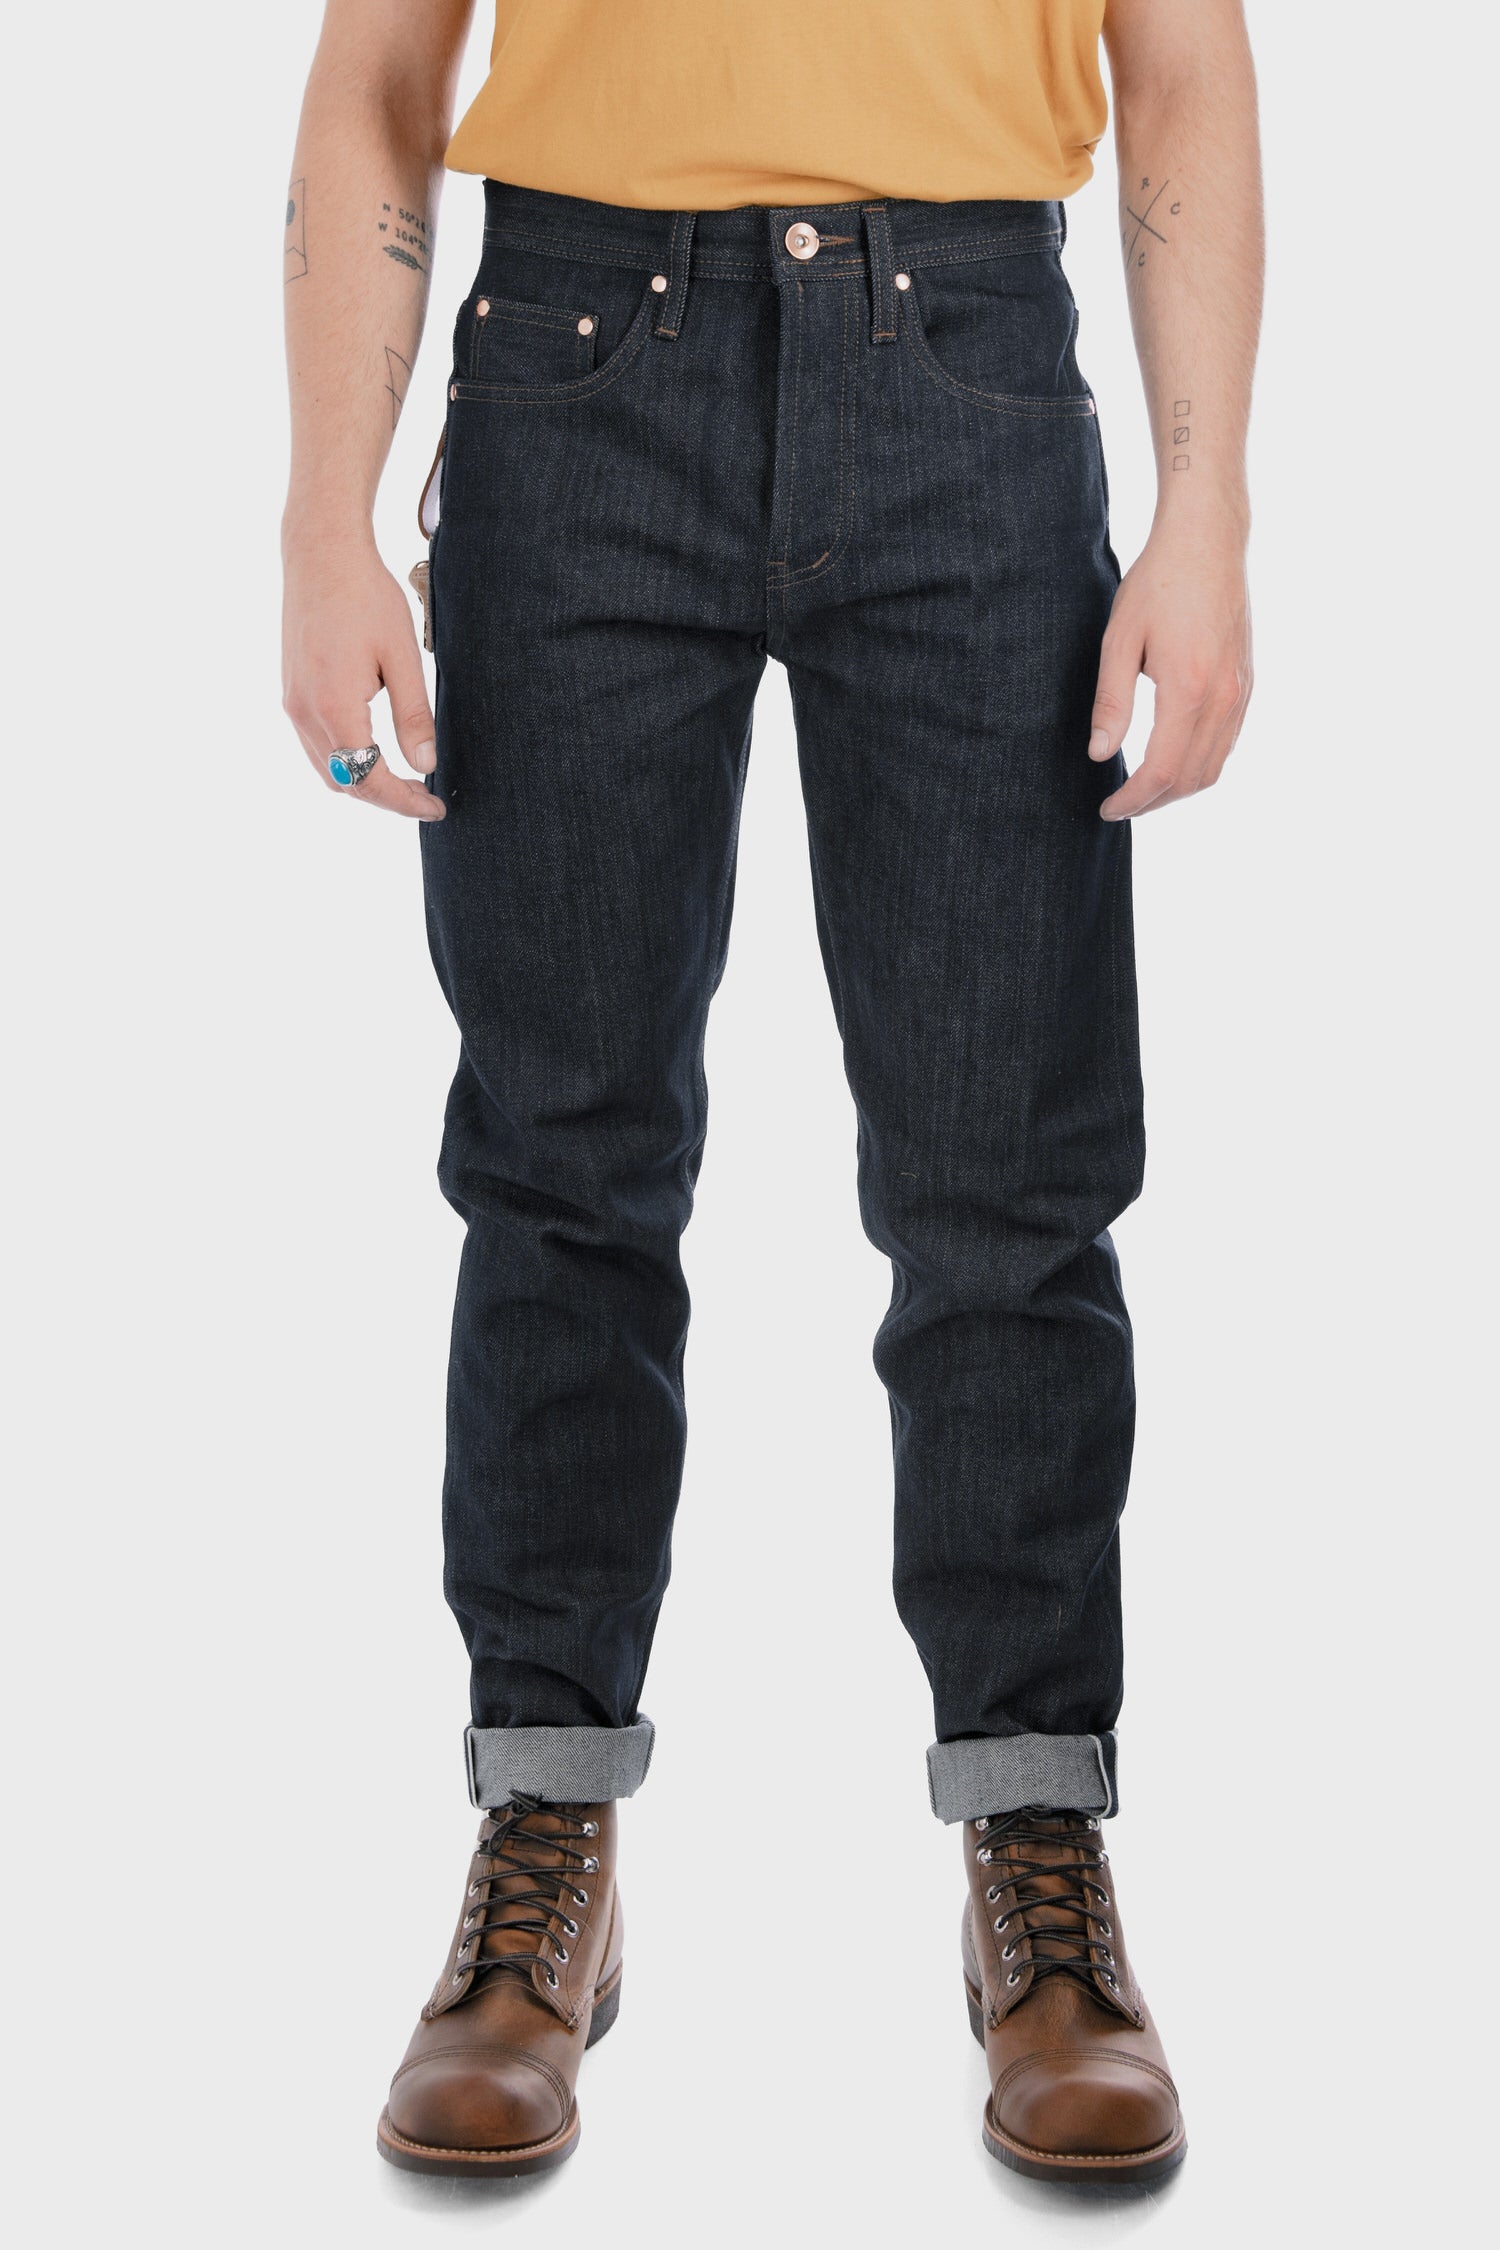 Unbranded Relaxed Tapered Fit in Indigo - Philistine